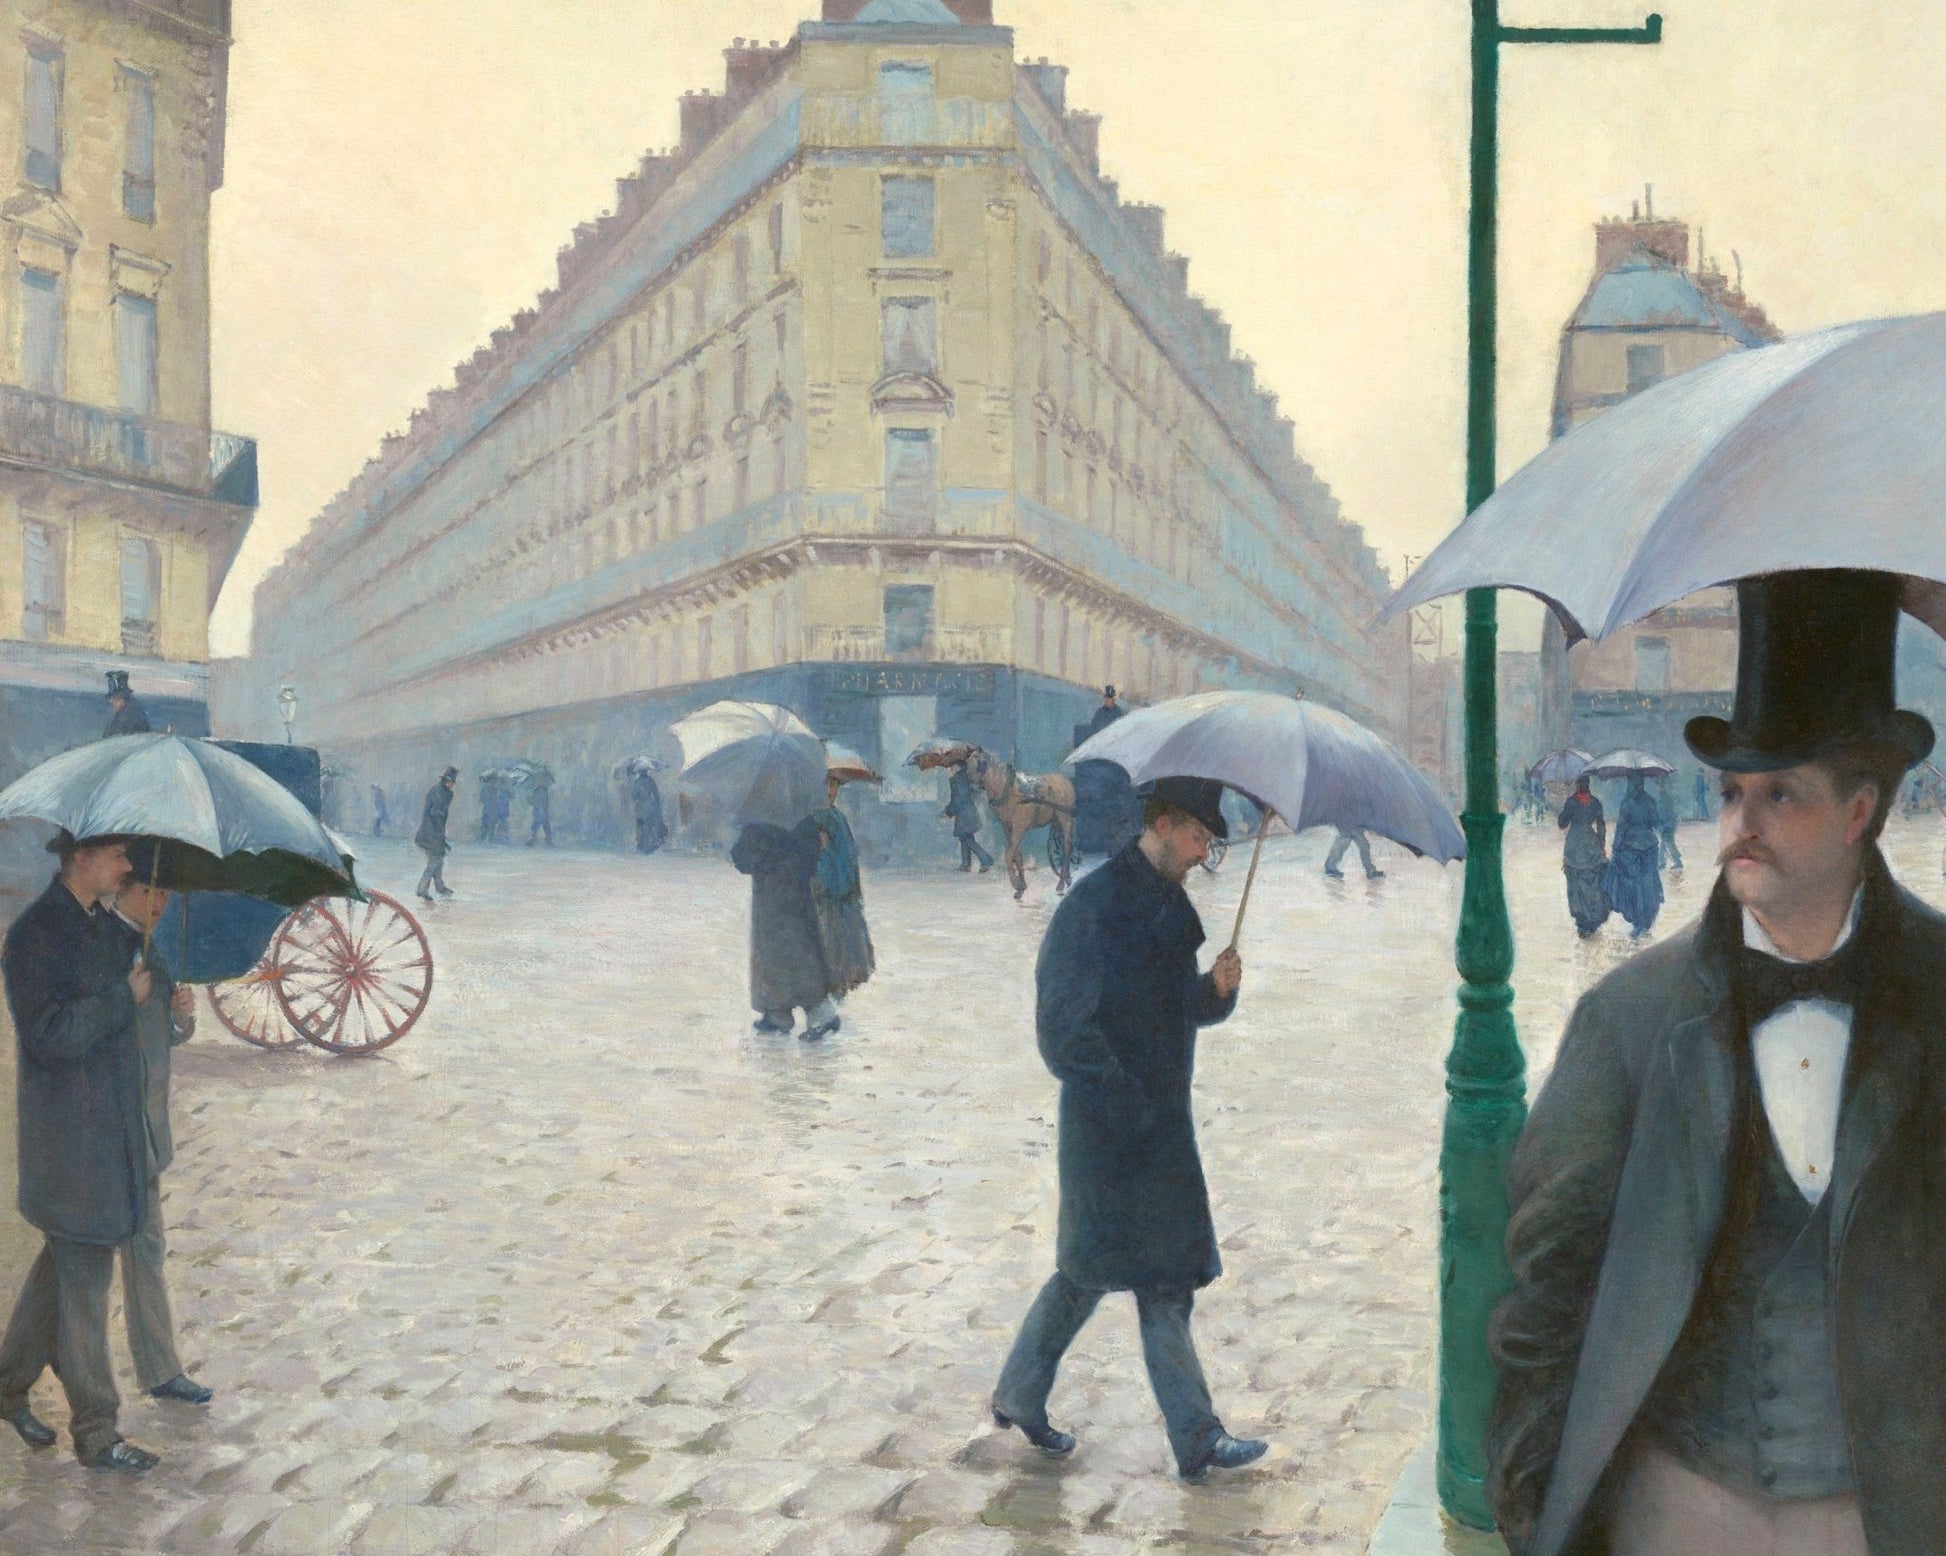 Gustave Caillebotte "Paris Street, Rainy Day" (c.1877) - Mabon Gallery